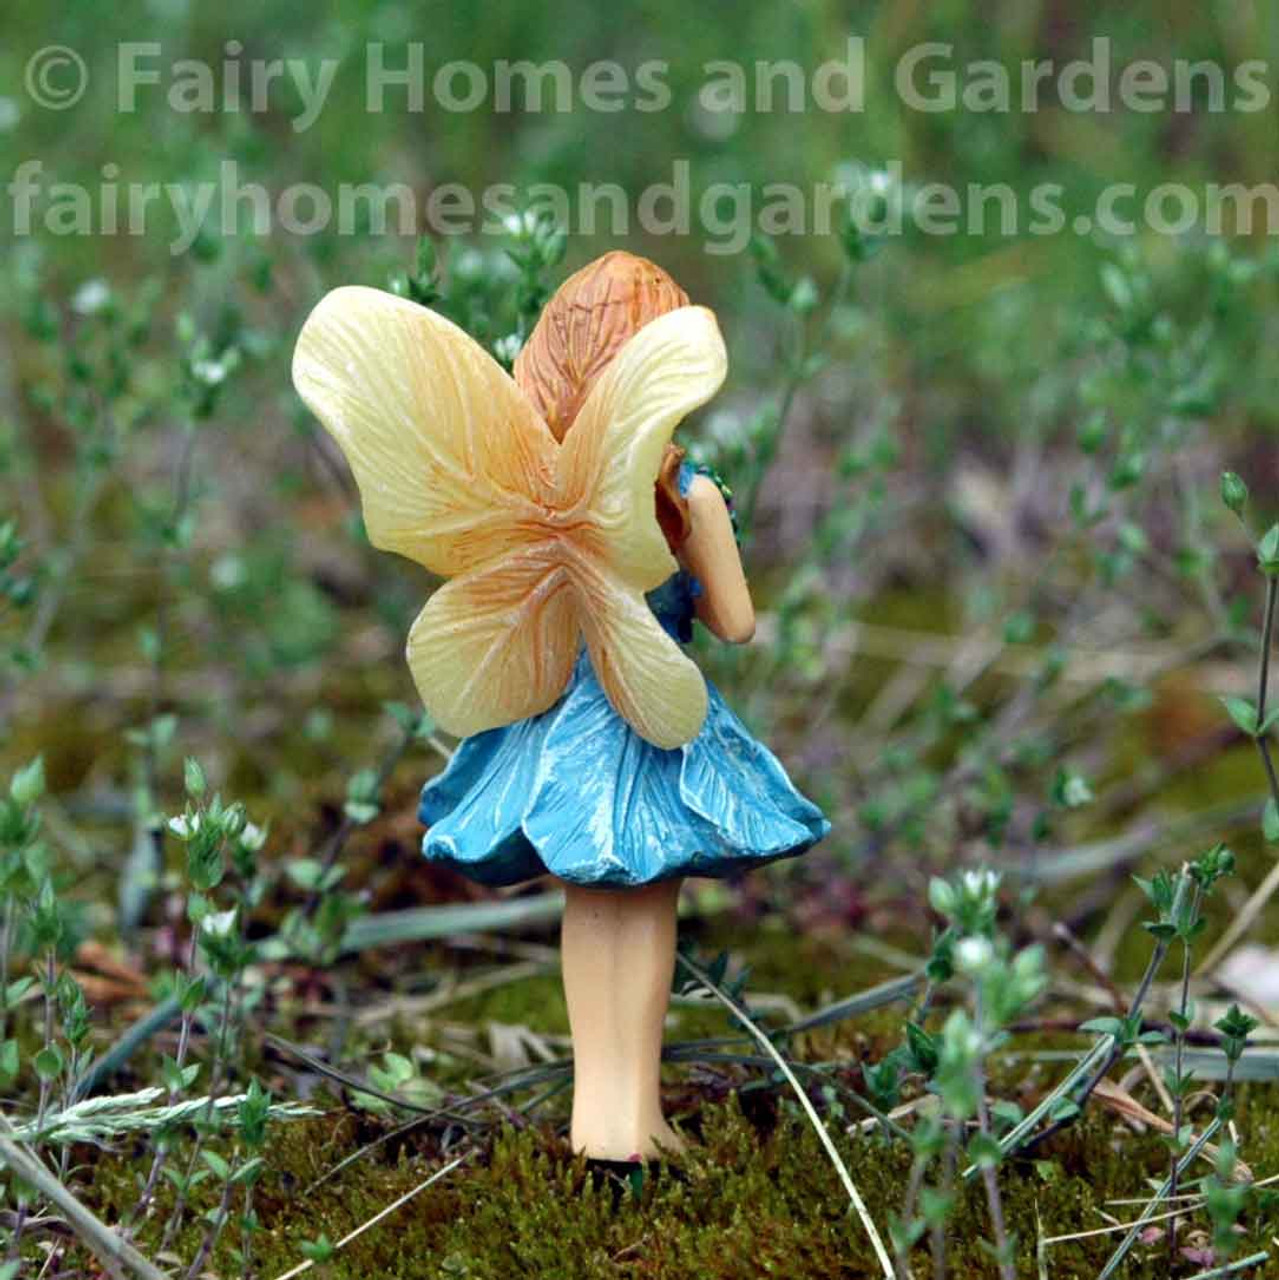 12 Fabulous Fairy Gardens That Don't Need Figurines